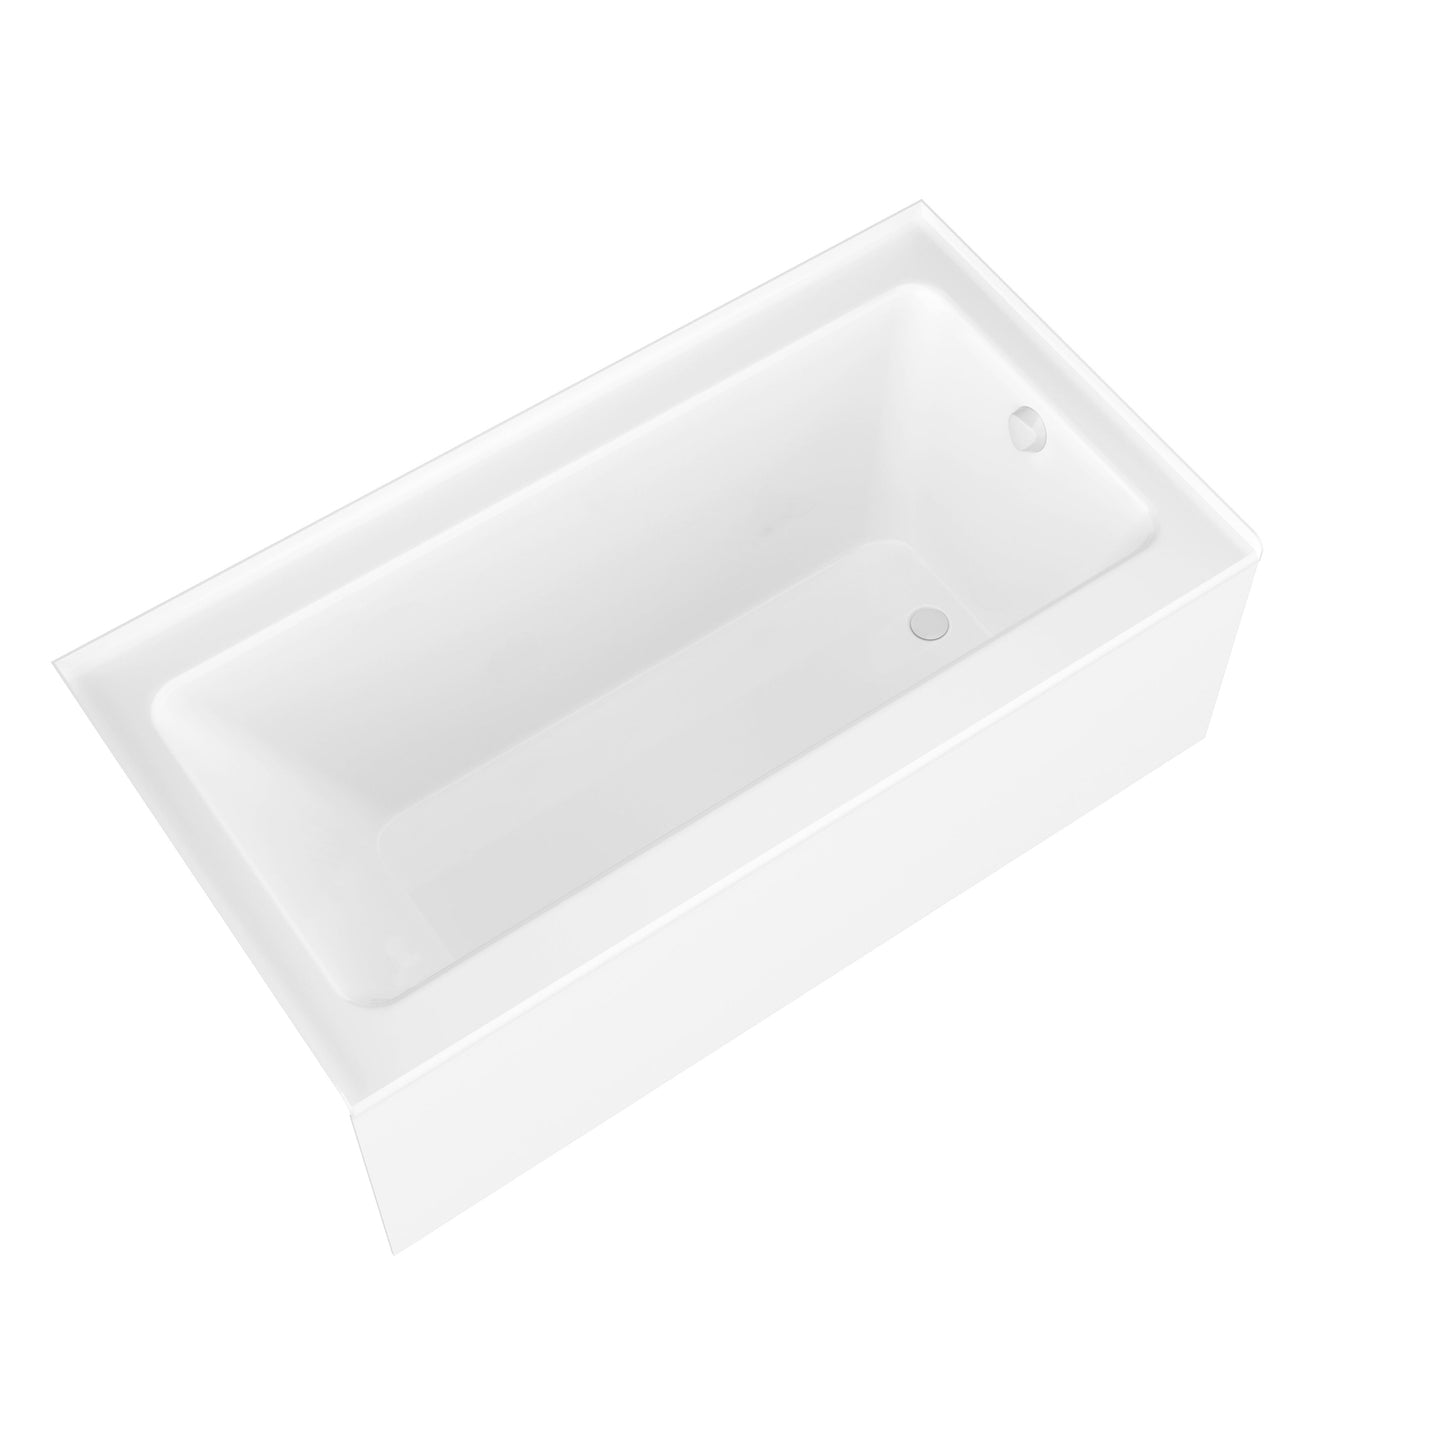 ANZZI Don Series White "60 x 30" Alcove Right Drain Rectangular Bathtub With Built-In Flange and Frameless Matte Black Sliding Door